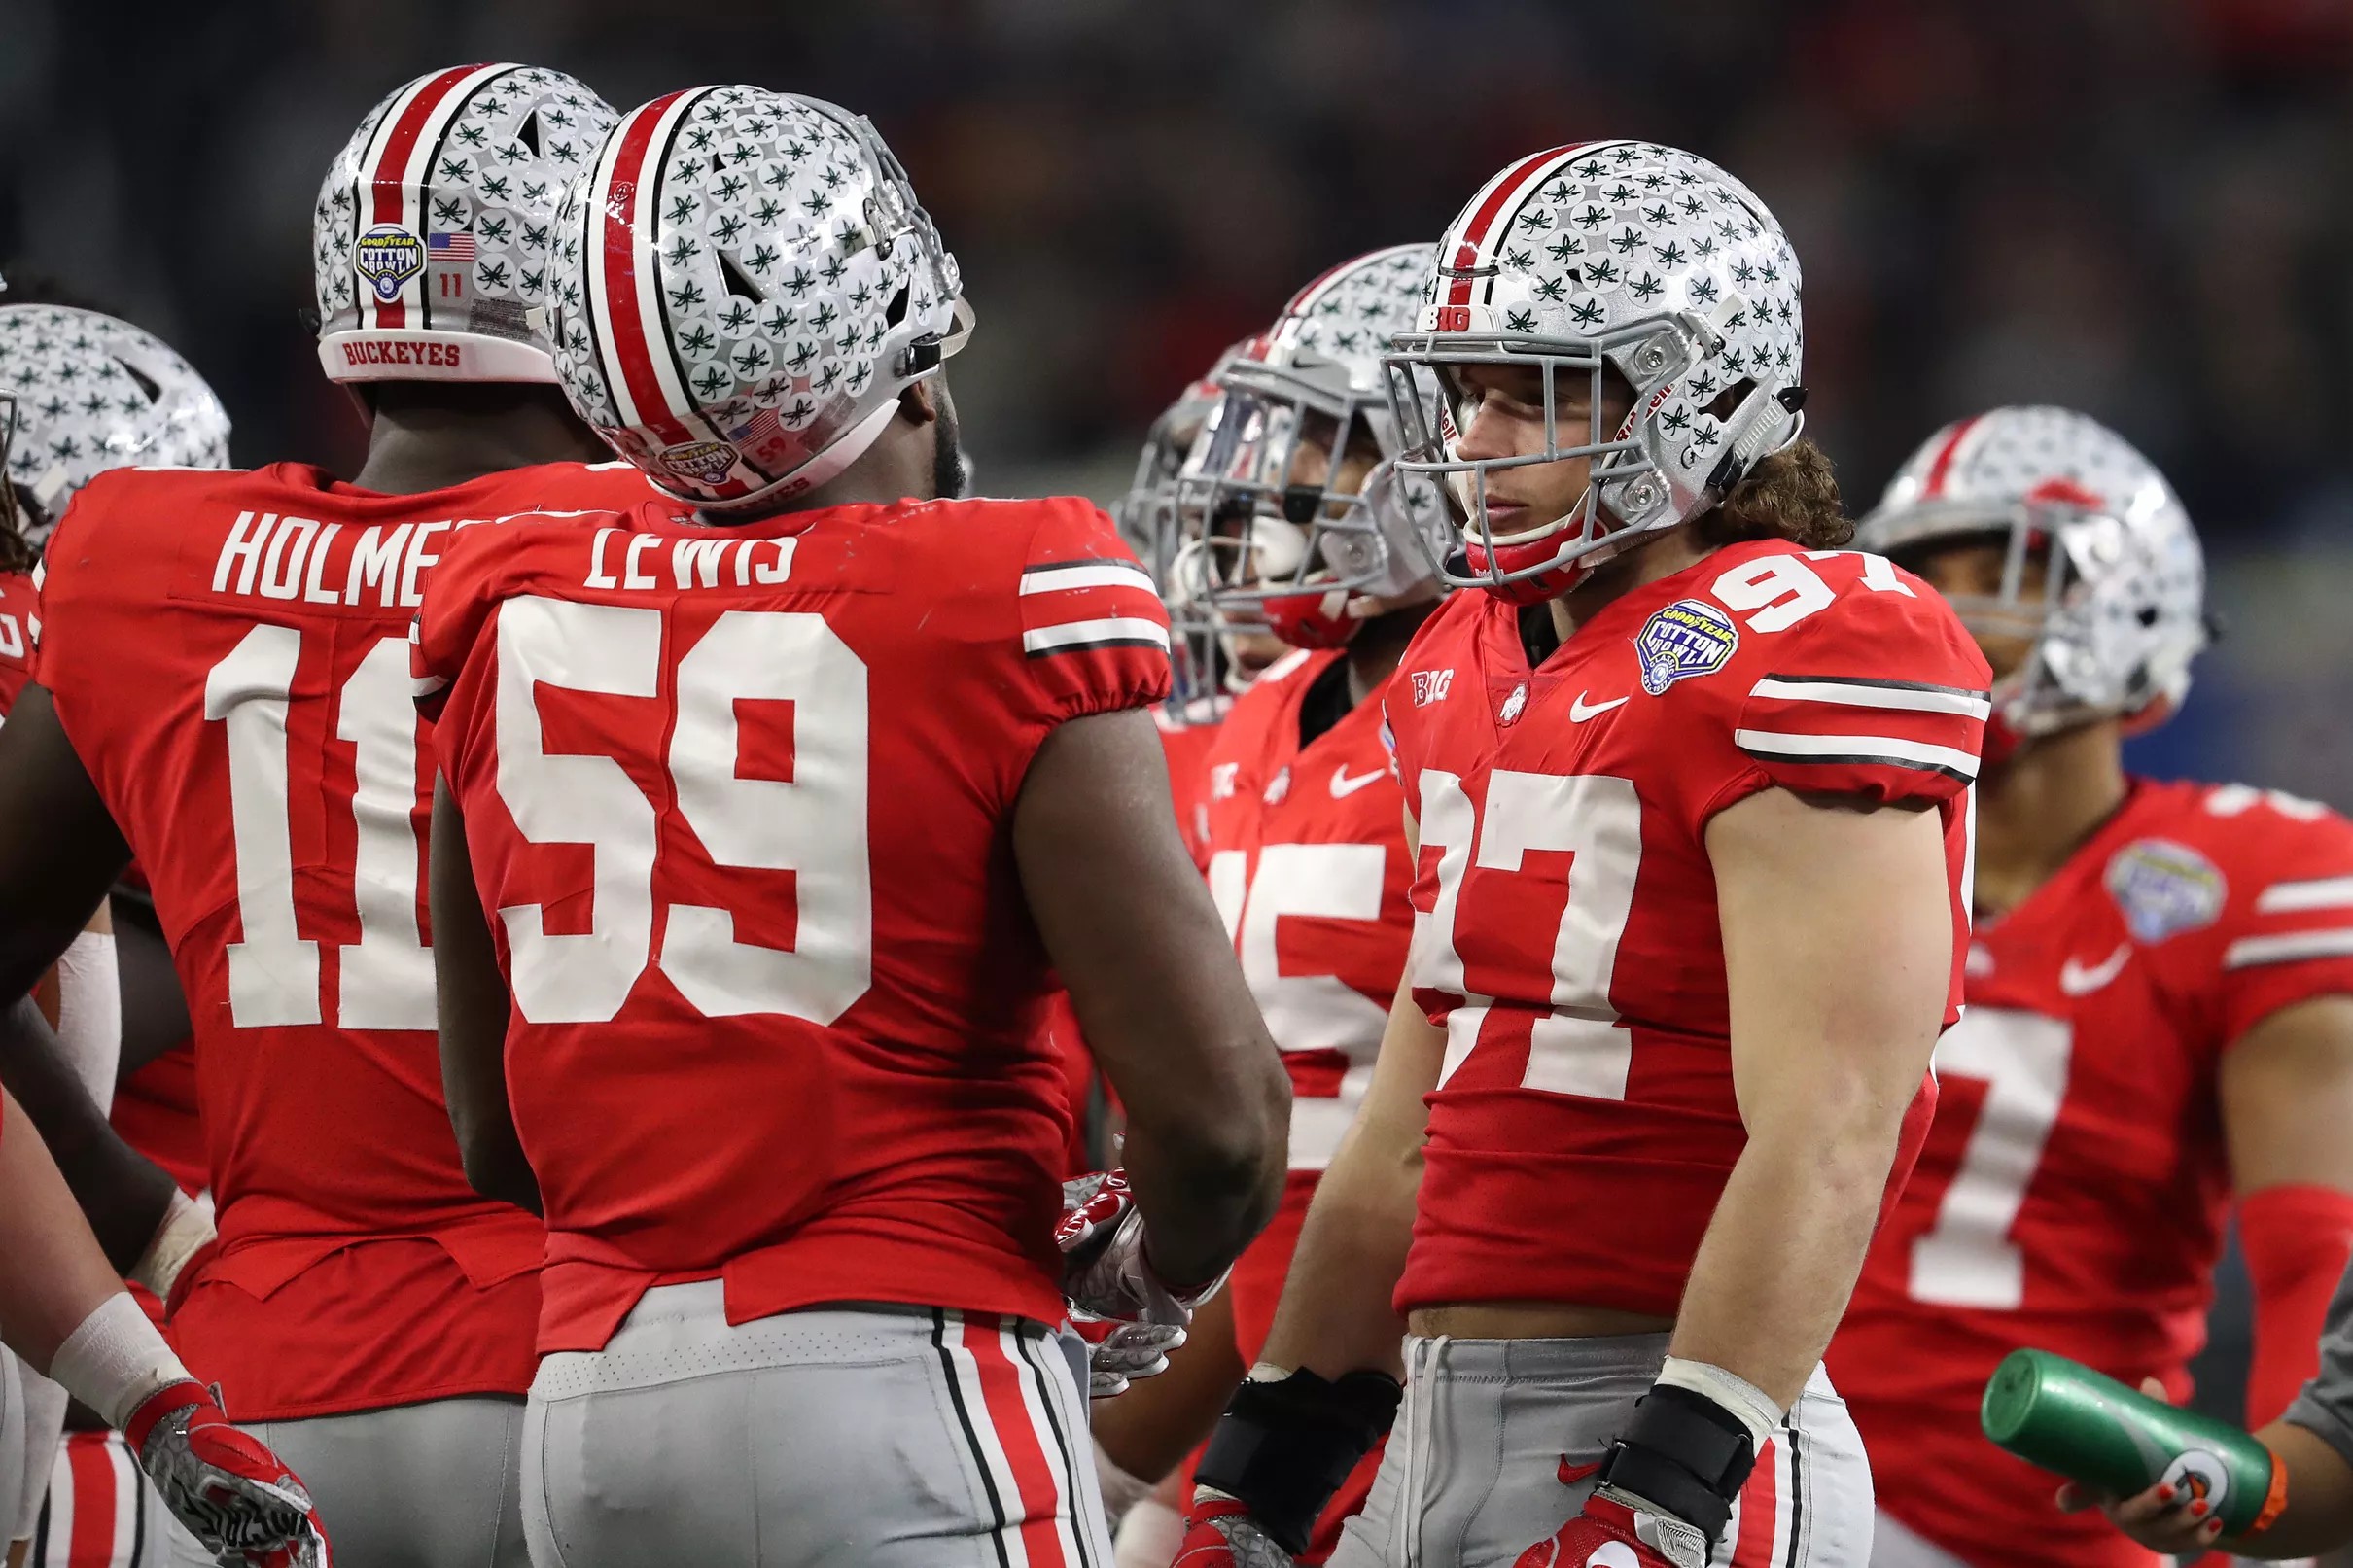 Are the reasons Ohio State might not make the College Football Playoff